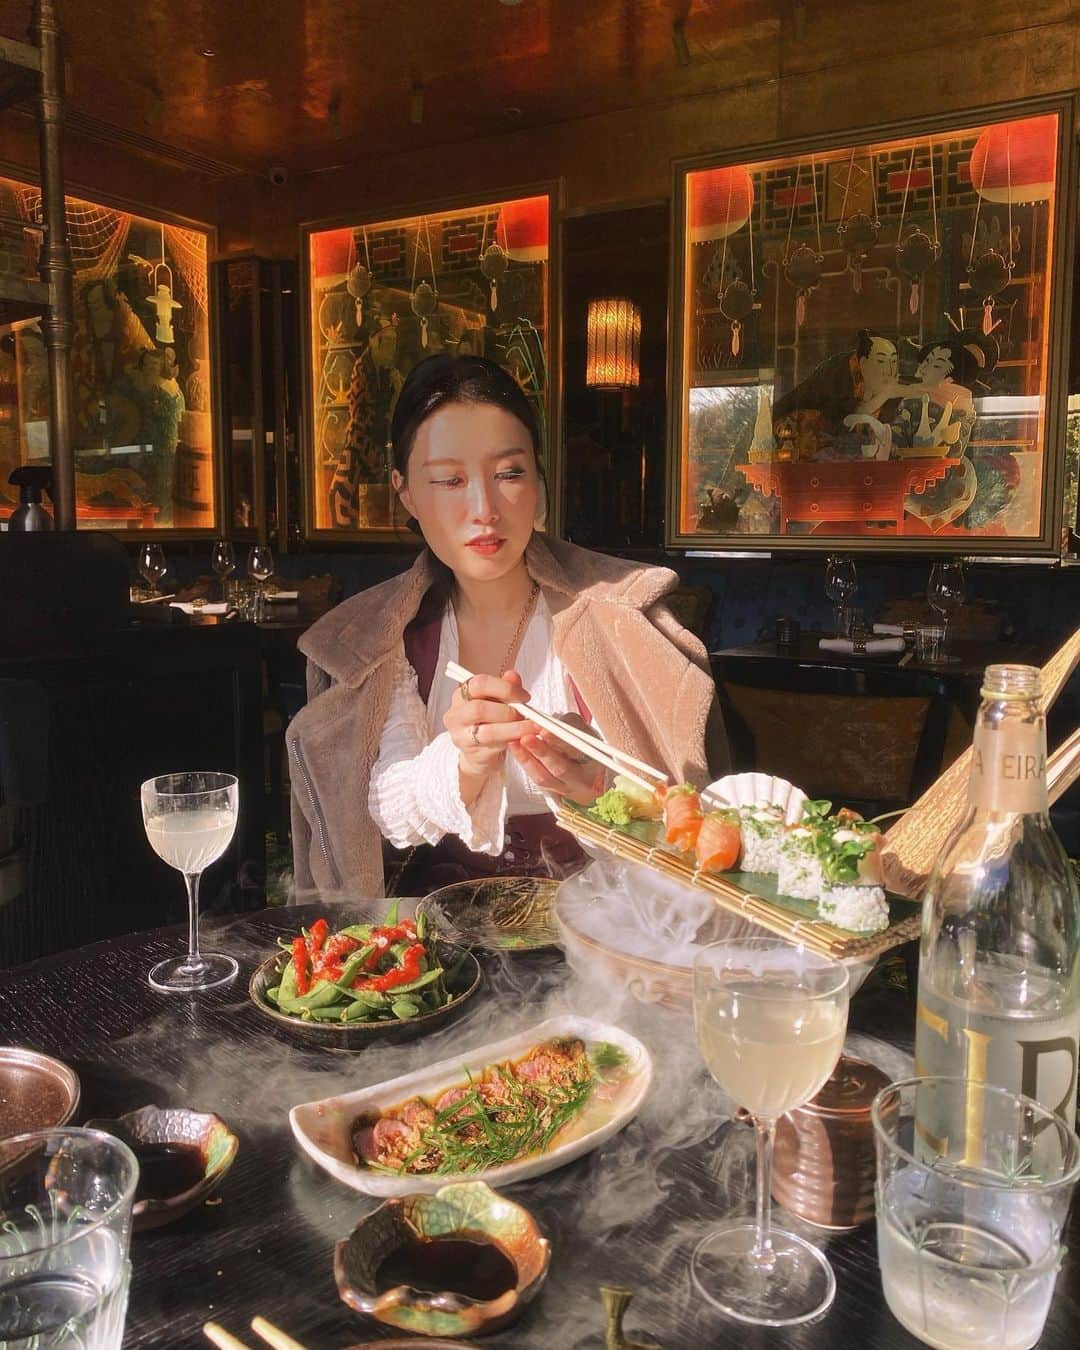 LIKARANAIさんのインスタグラム写真 - (LIKARANAIInstagram)「The Ivy Asia 🌸 We had an amazing SAKE lunch with @theivyasia yesterday 🍶🍱 I was so excited to try some of the new offerings on the menu and they did not disappoint.  We tried the Sake Sensations Menu, It’s a fantastic experience menu paired with three glasses of sake, that really bring out the flavours!  𓏊 AKASHI-TAIJUNMAI GINJO SPARKLING SAKE Starters: Beef tataki, yellowtail, cucumber & takins maki roll, seared salmon nigiri, prawn tempura, pork & kimchi dumplings   𓏊 TOKUBETSU JUNMA Mains: Black cod miso, salt & pepper beef, broccoli w/ steamed rice  𓏊 SHIRAUME GINJO UMESHU Red Dragon Dessert: Soft serve ice cream, cinnamon sugared doughnuts w/ chocolate sauce, mango & raspberry  They were all incredible but this sugared doughnuts was heavenly! I can’t go to The Ivy Asia and not have the dessert platter 🤤 The starters were delicious, and the Black cod miso was my fave dish, it was sublime!  Definitely a restaurant to book for a special occasion/ birthdays if you just want to treat yourself! Great quality food with exceptional service. Go check out @theivyasia   *ᴘʀ ɪɴᴠɪᴛᴇ  #TheIvyAsia #TheIvyAsiaGuildford #SakeSensations   。 。 。 。 。 。  #guildford #surrey #londonfoodscene #food #sake #londonfoodspots #londonfoodgram #japanesecuisine #london #visitlondon #londontravel #explorelondon #discoverlondon #england #uk #londoncitylife #beautifulengland #likeforlikes #shoutout #girlstravel #コメント返し  #写真好きな人と繋がりたい #おはようございます」11月2日 7時03分 - likaran